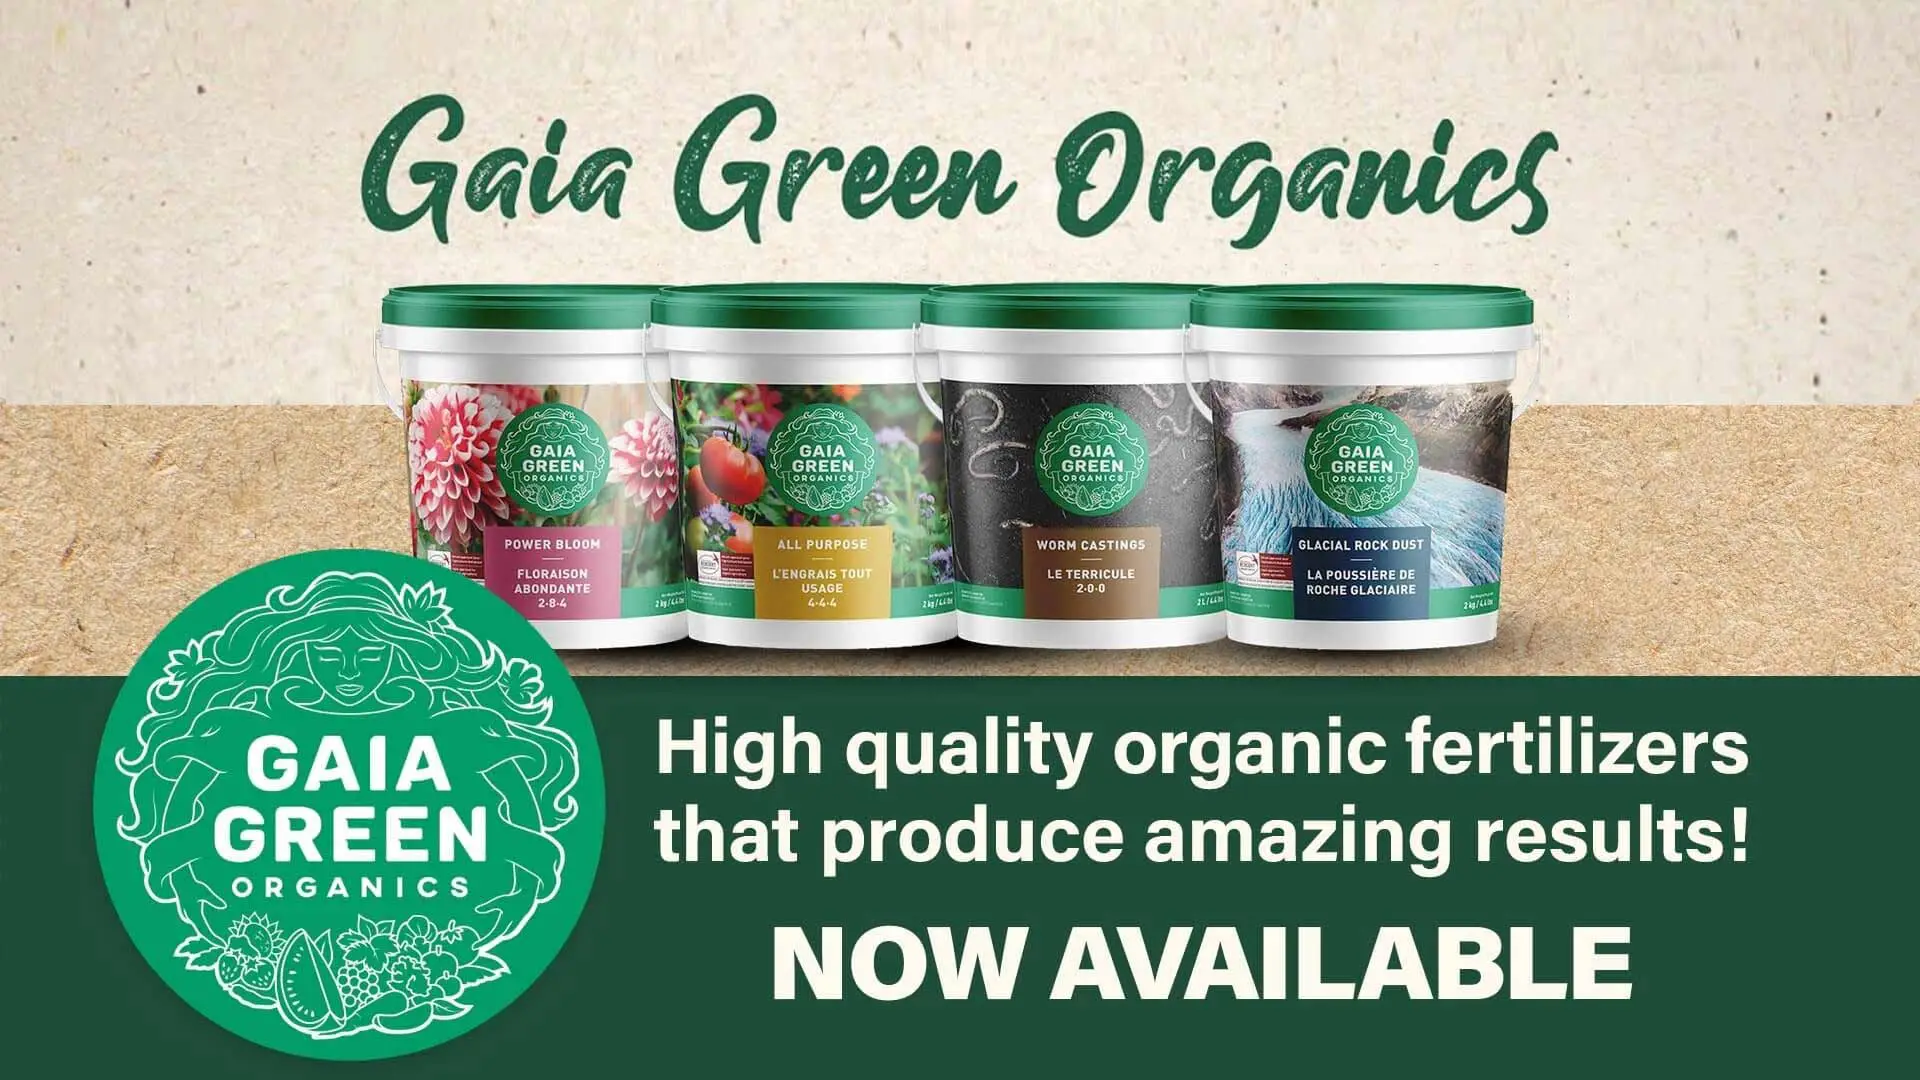 Gaia Green Organics products - available at Homegrown Outlet